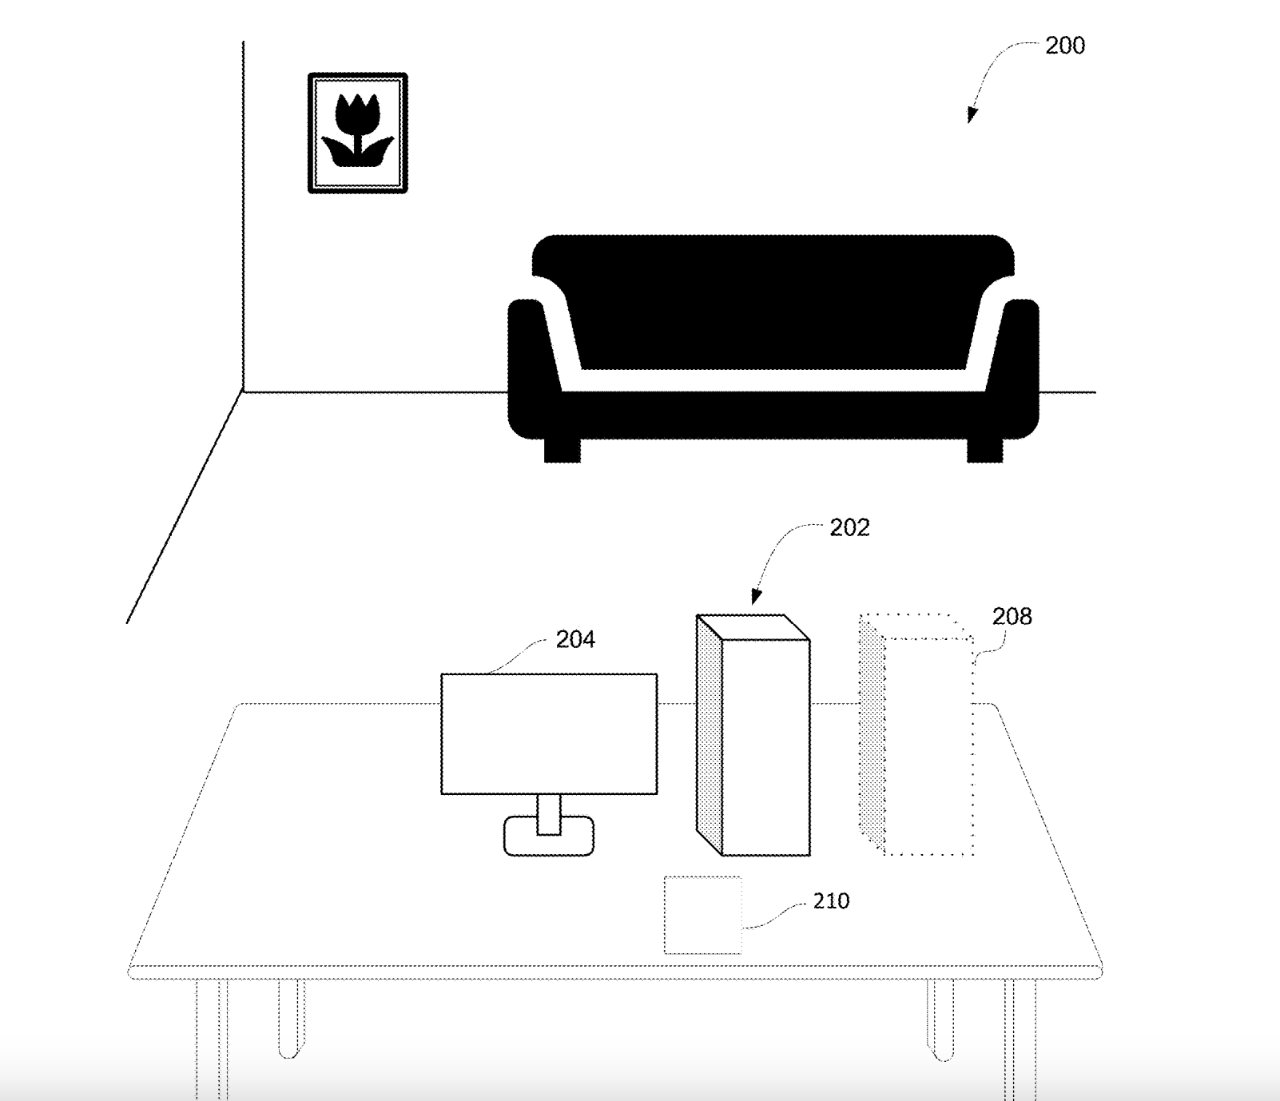 Maybe that couch is there, maybe it isn't, but Vision Pro will be able to show new Apple devices in the wearer's home